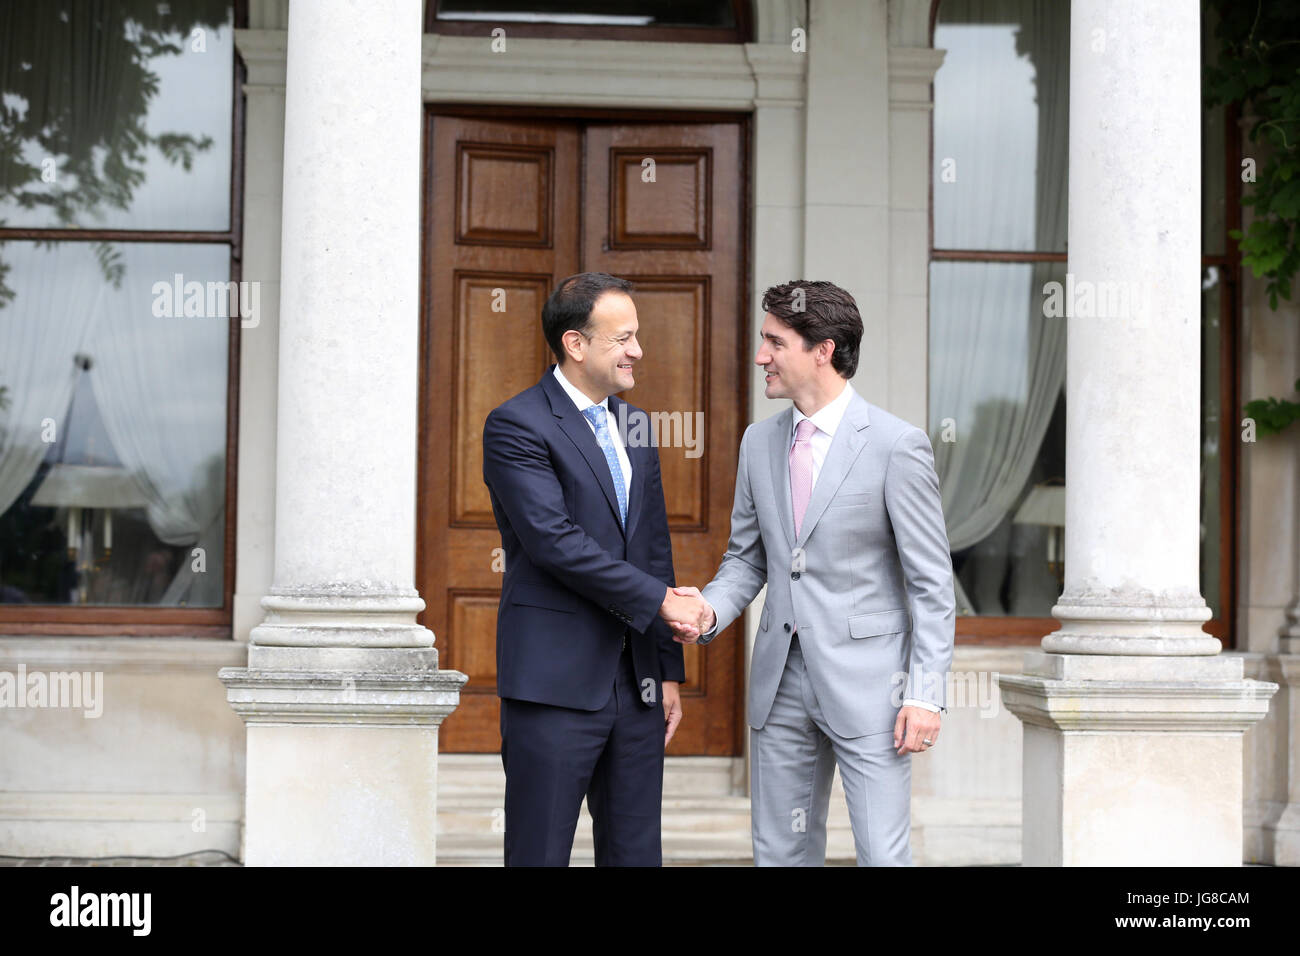 4/7/2017. Prime Ministers, Justin Trudeau of Canada and Leo Varadkar of Ireland, at play with hurley stick and ball, during Mr. Trudeau's official visit to Ireland. Hurling is believed to be the fastest field sport in the world. The recently elected Mr. Varadkar is believed to be the first openly gay male leader of a country. Stock Photo